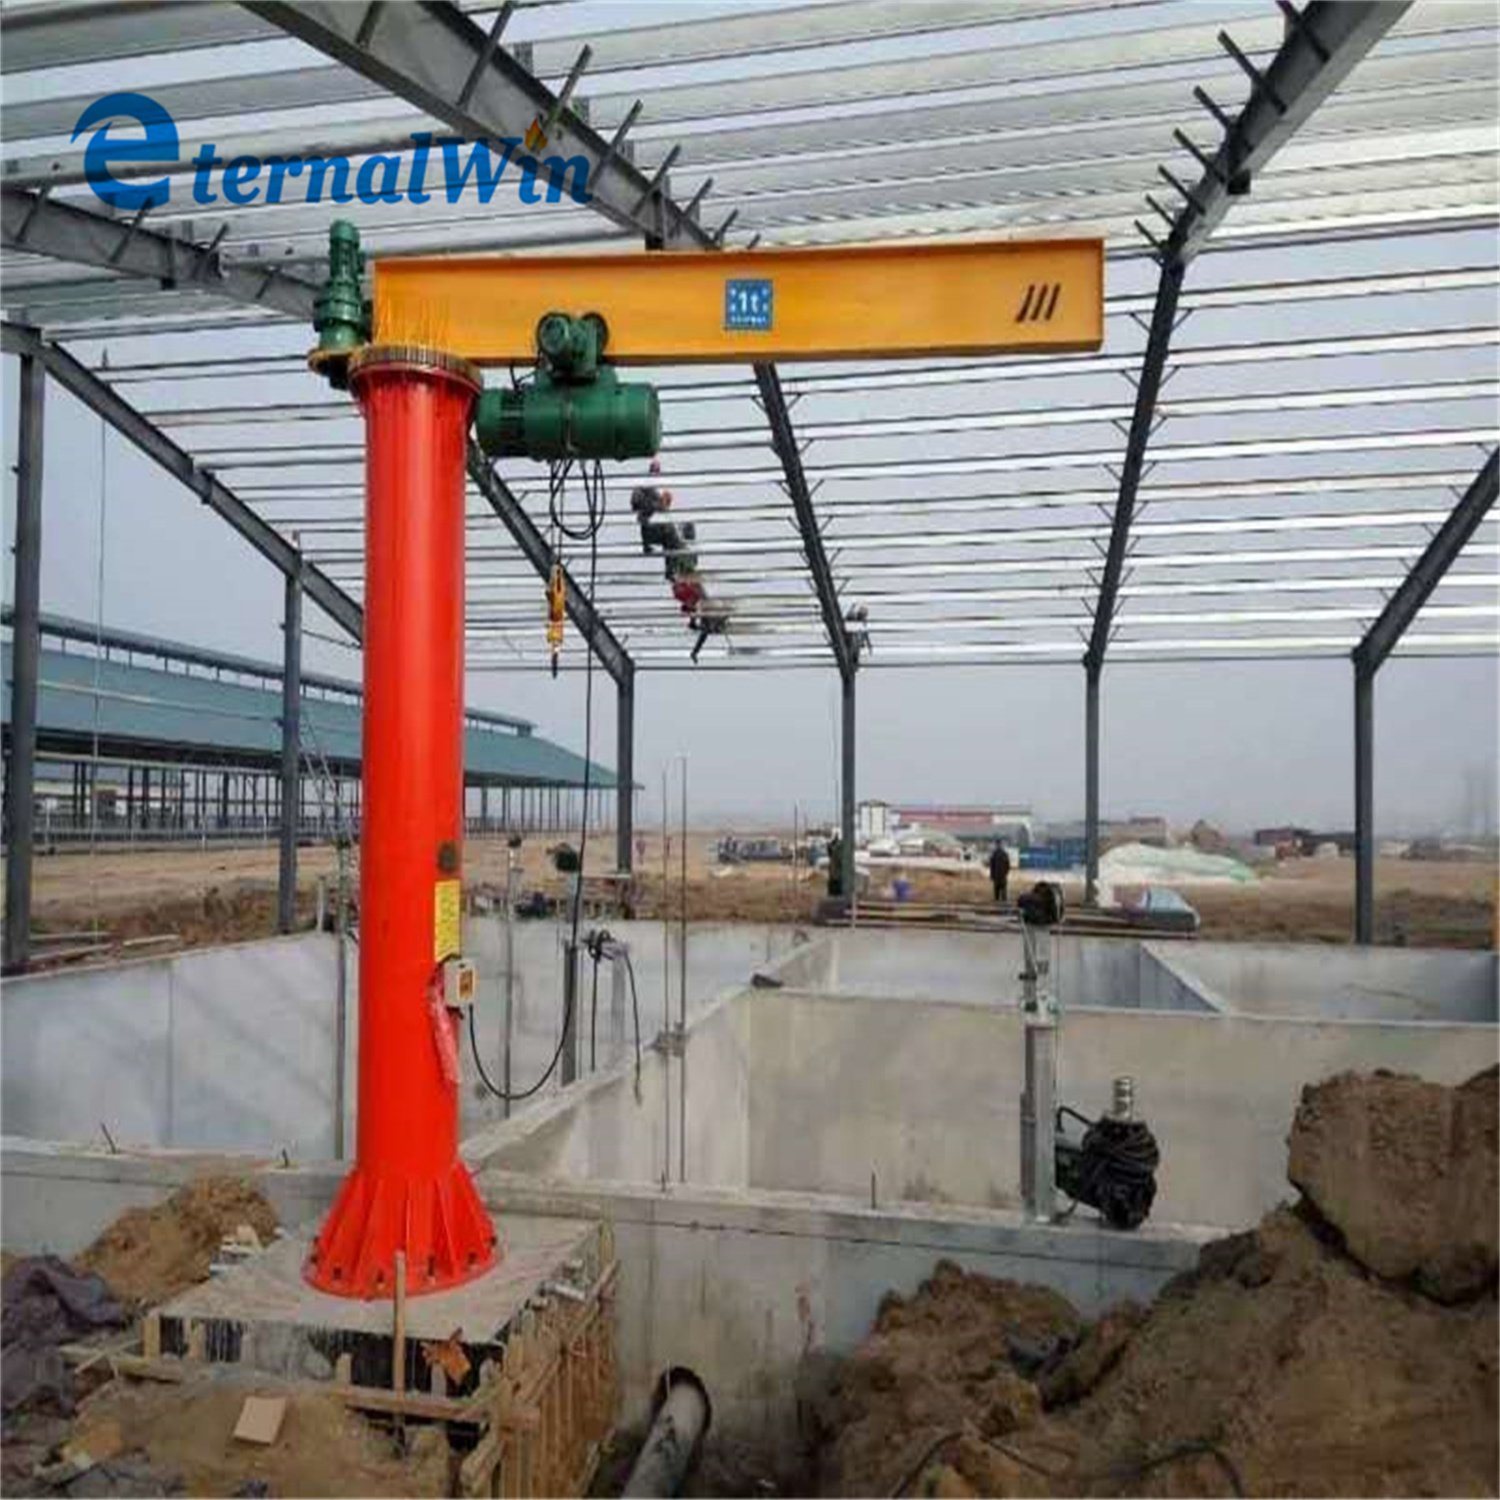 Motorized Outdoor Rated Jib Crane for Ship Boat Marine Use